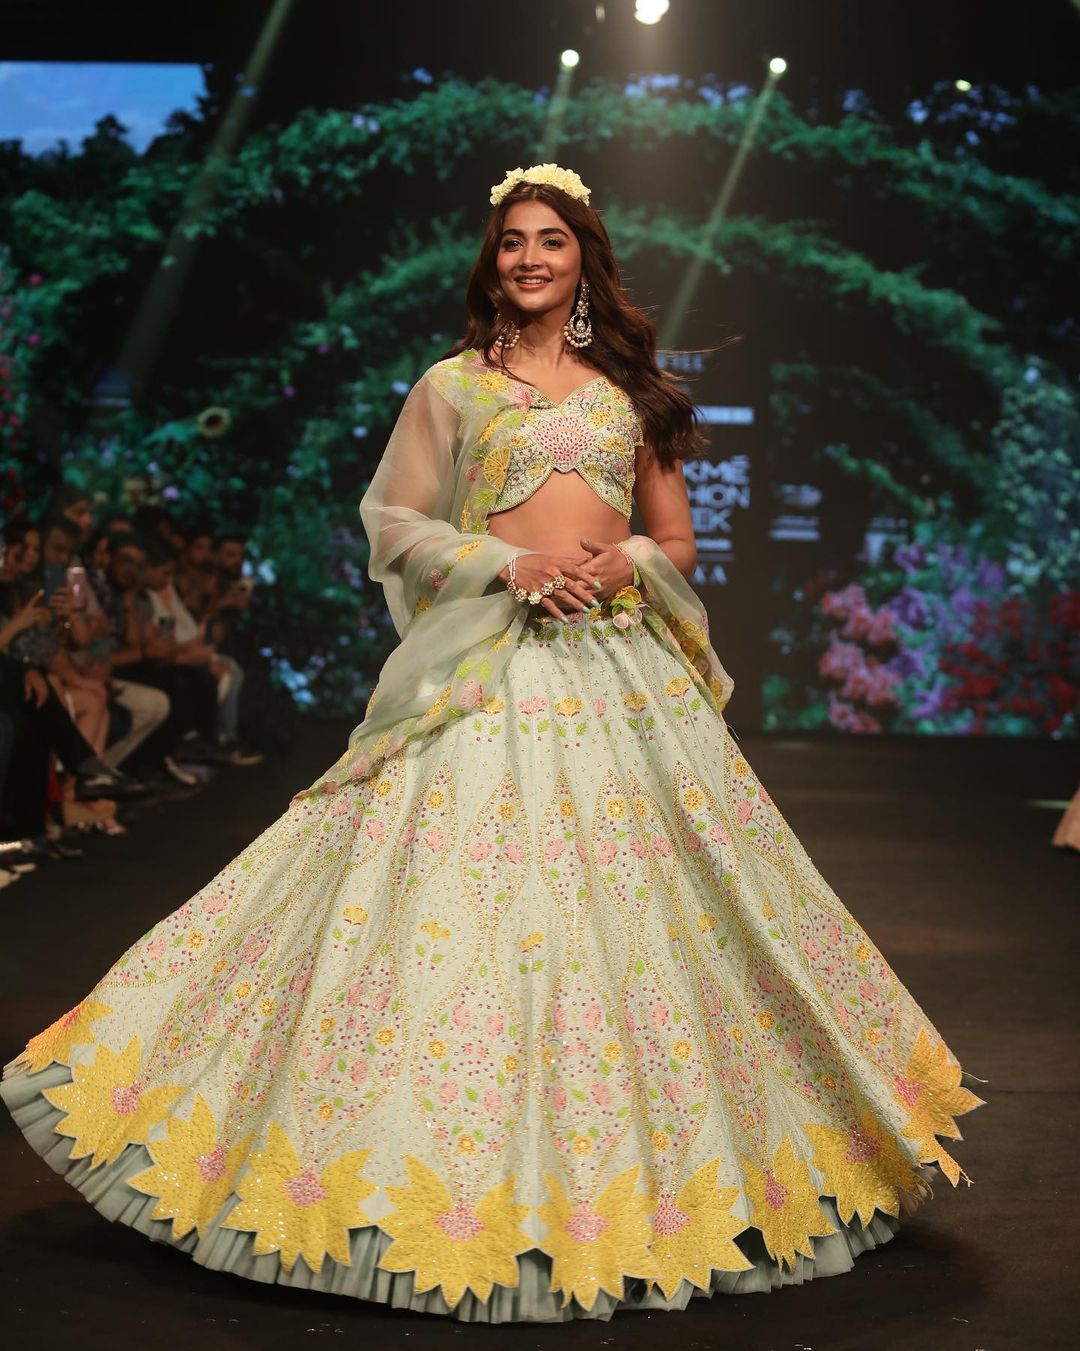 Pooja Hegde looked pretty in the floral lehenga by 6Degree